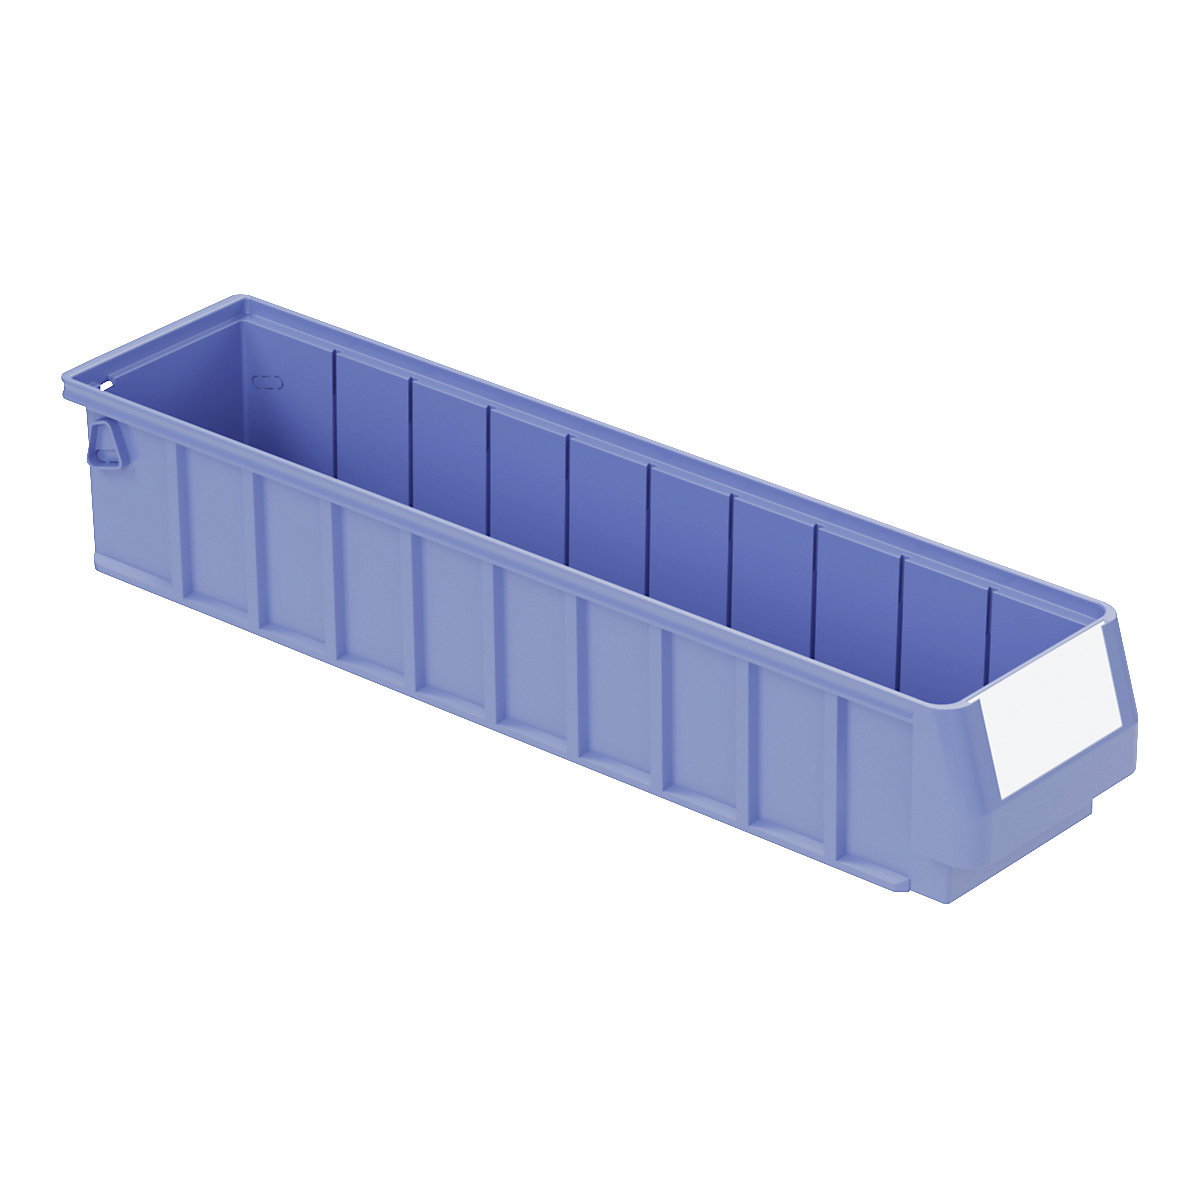 Shelf bin – BITO, made of PP, LxWxH 500 x 117 x 90 mm, pack of 16-5